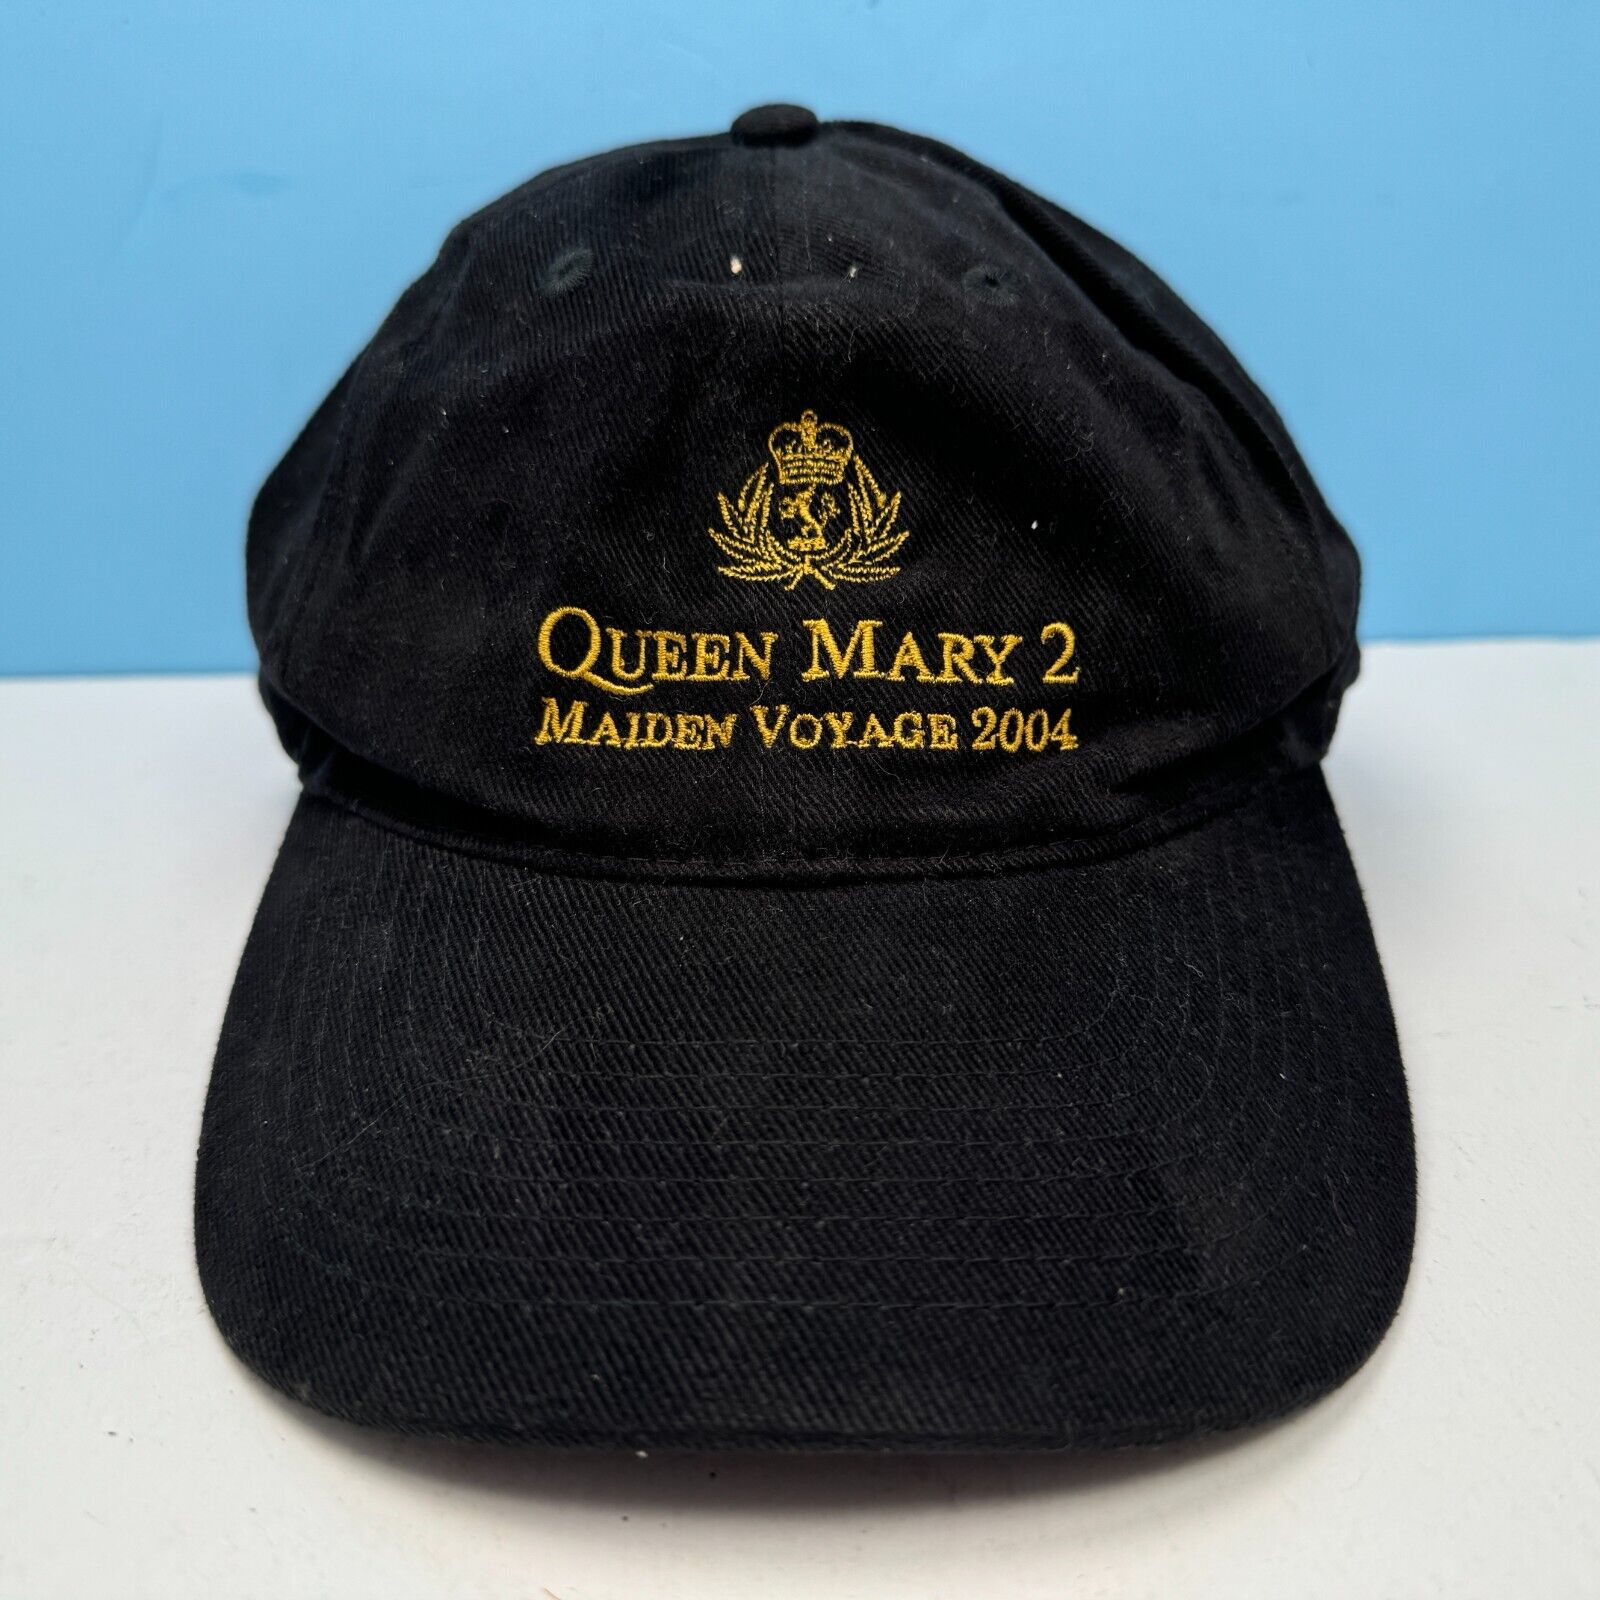 Cunard Line Queen Mary 2 World Voyage 2004 Crew Cap Black Gold Embroidered EXC